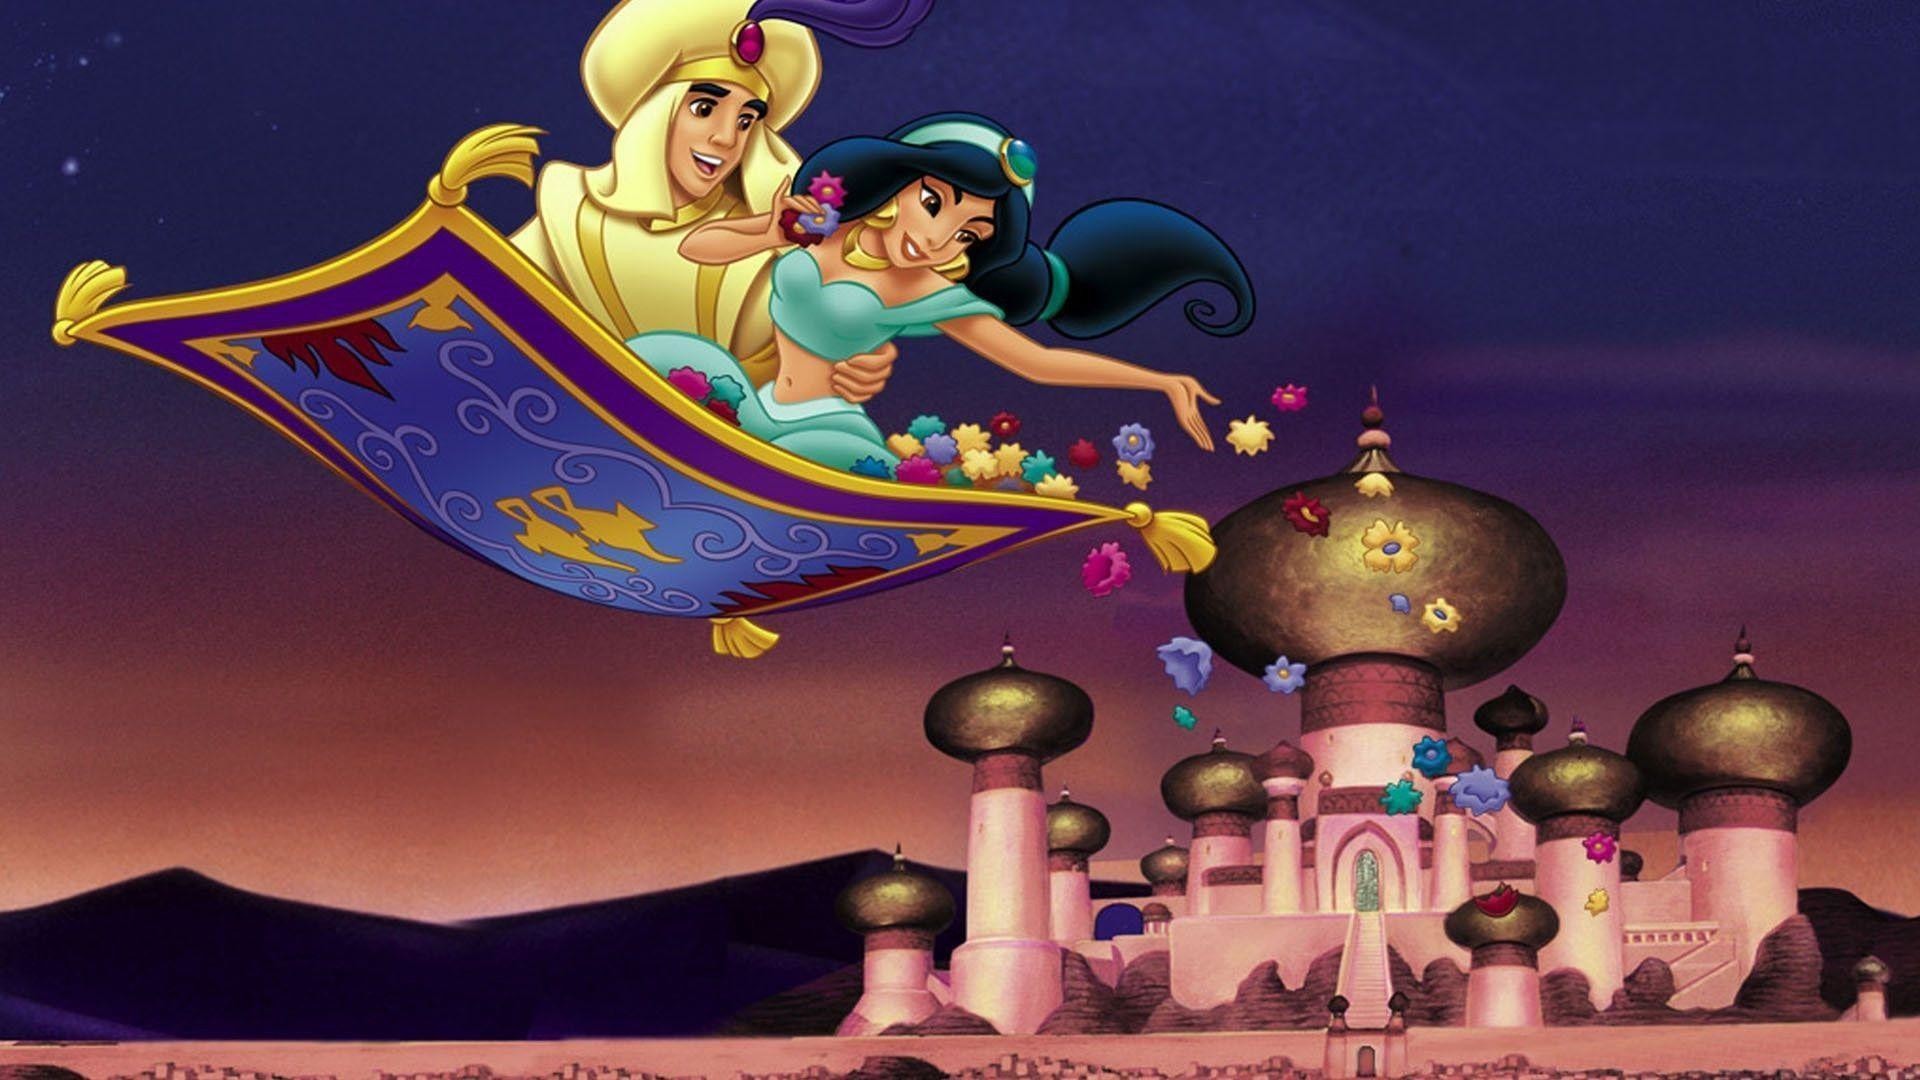 20 Aladdin Magi HD Wallpapers and Backgrounds